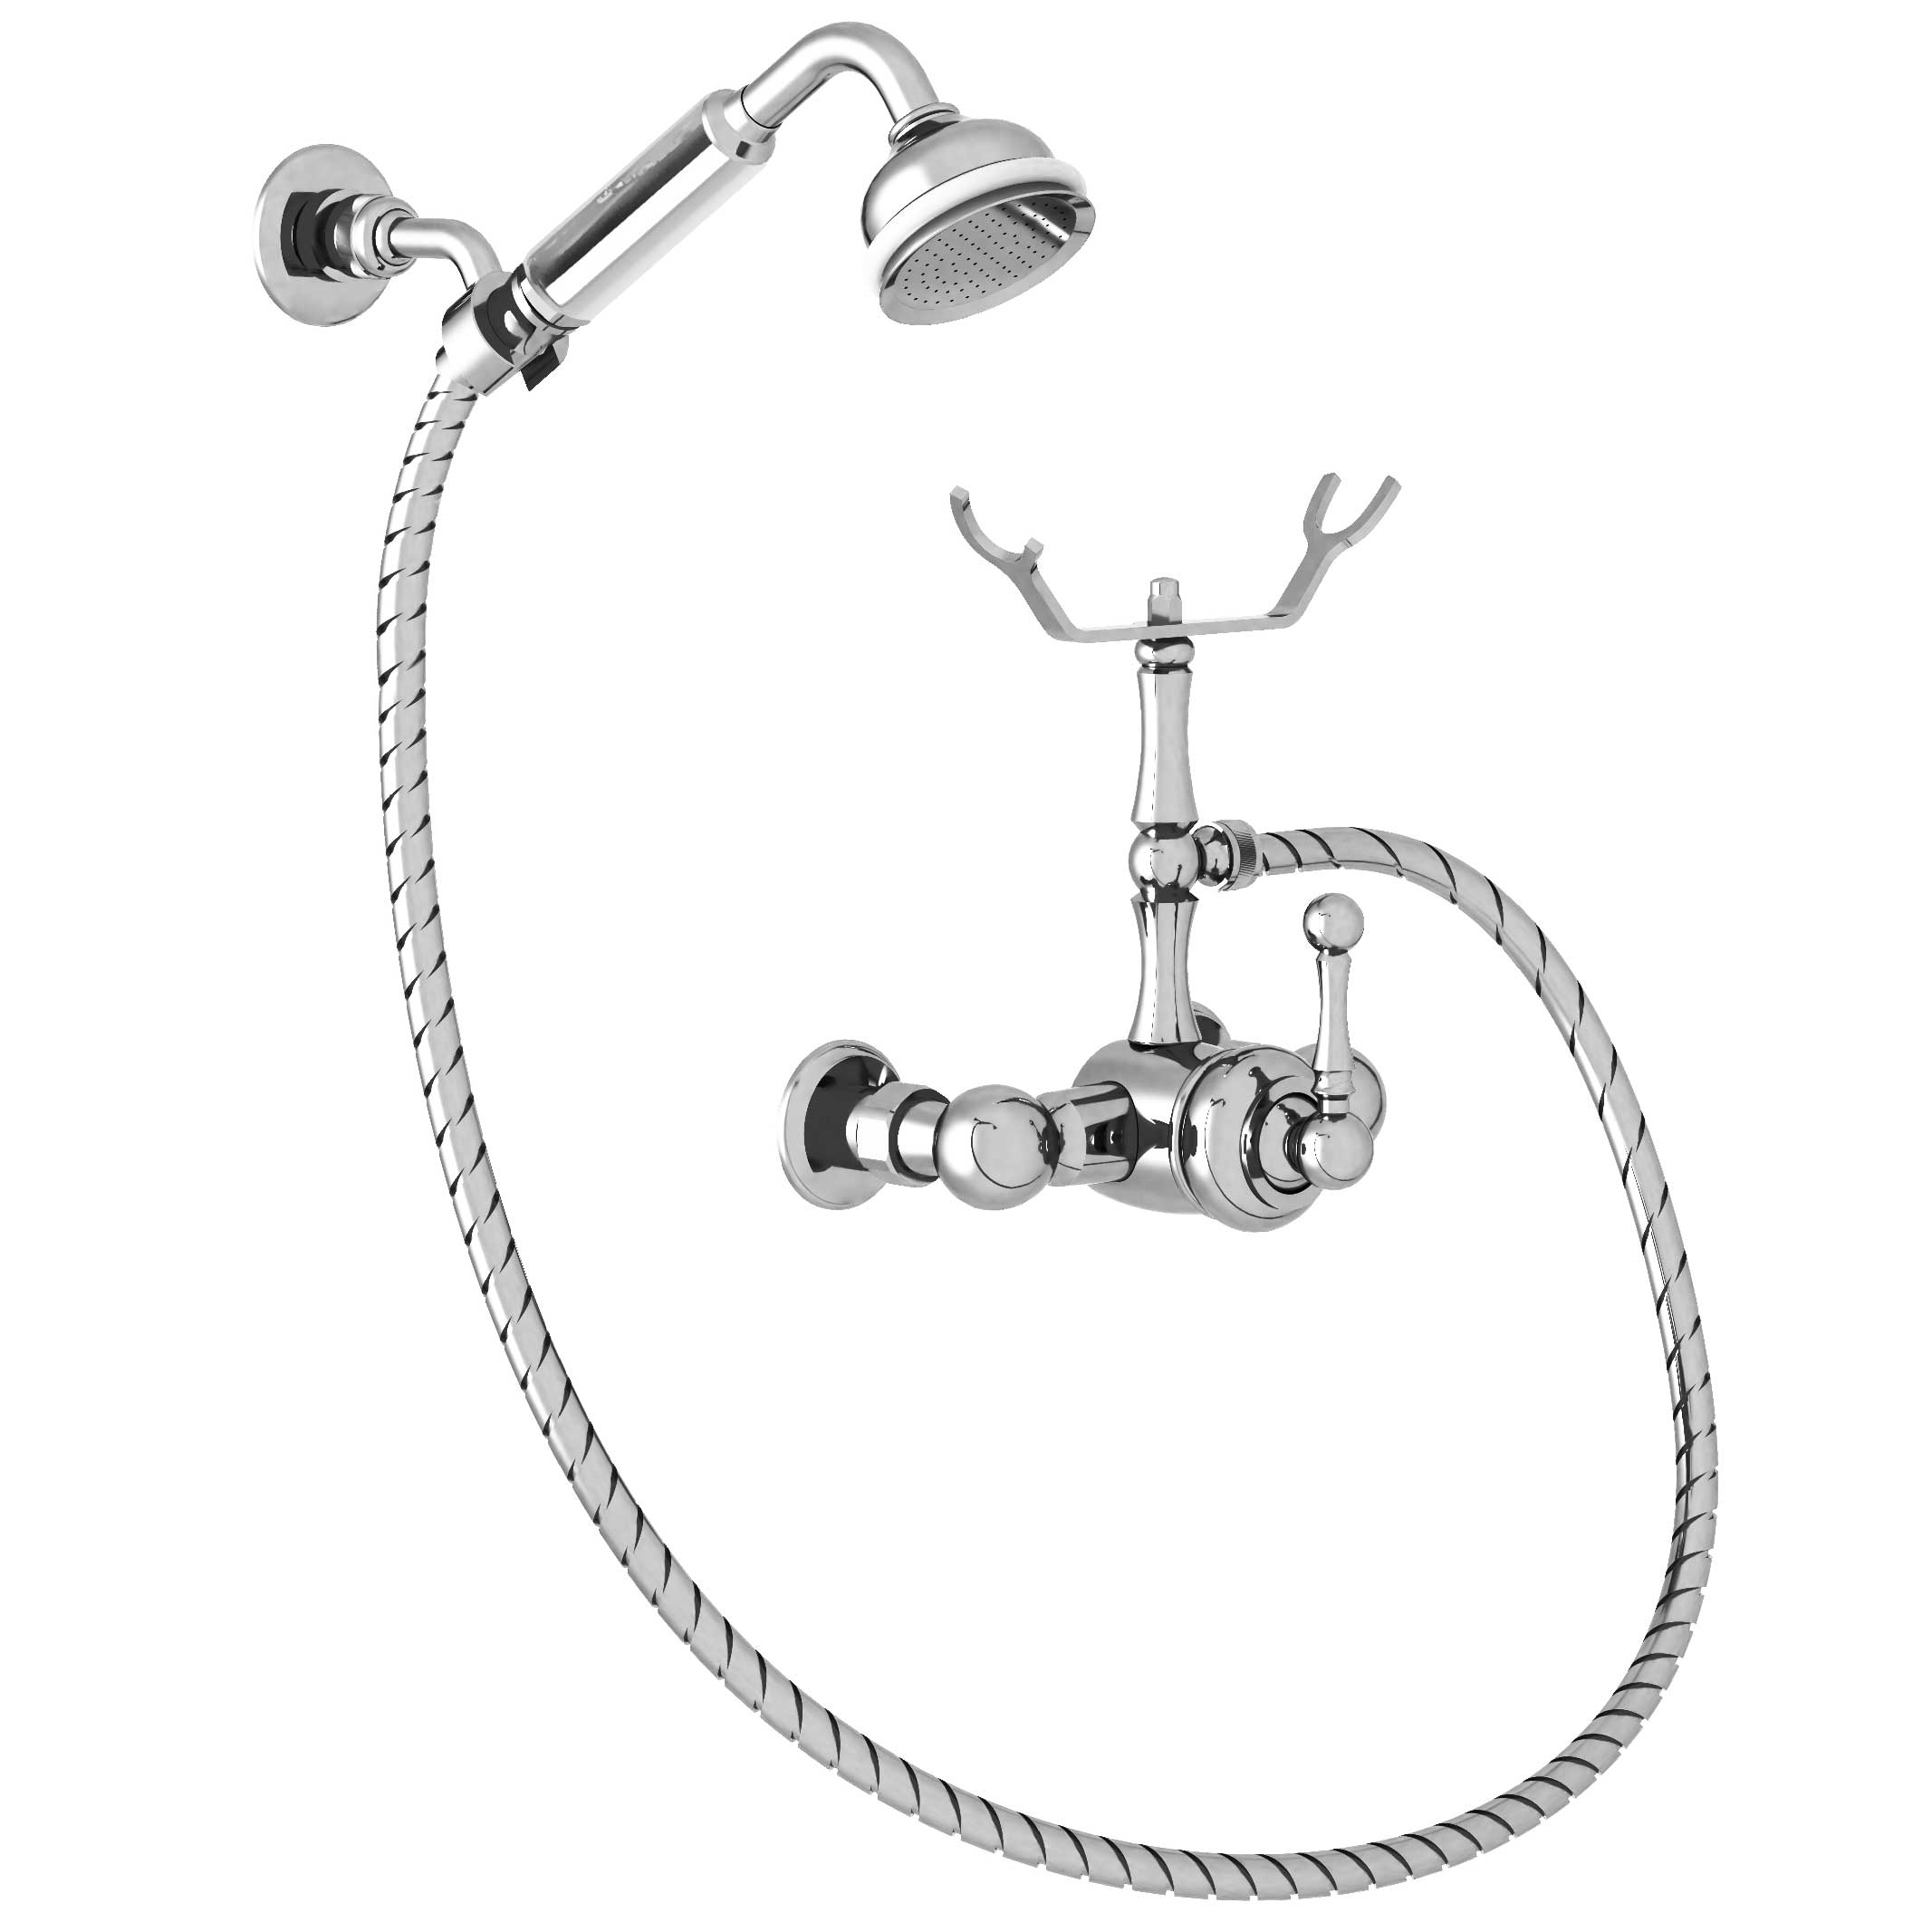 M40-2201M Single-lever shower mixer with hook